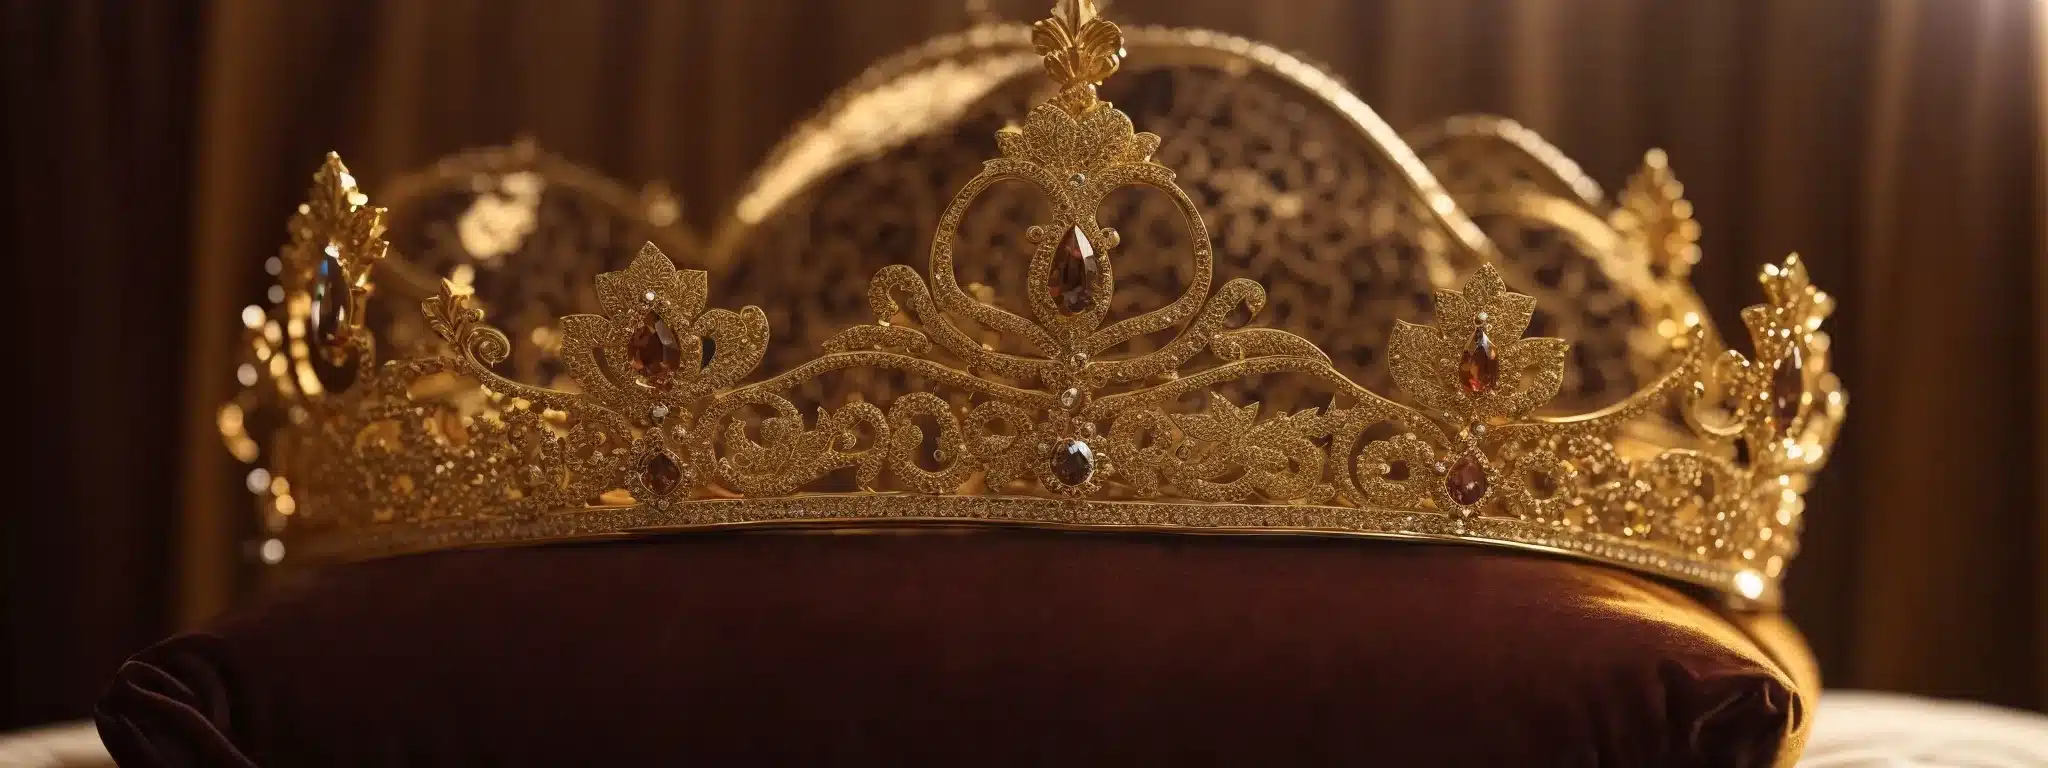 A Regal Crown Atop A Luxurious Velvet Cushion, Bathed In A Warm, Golden Light.